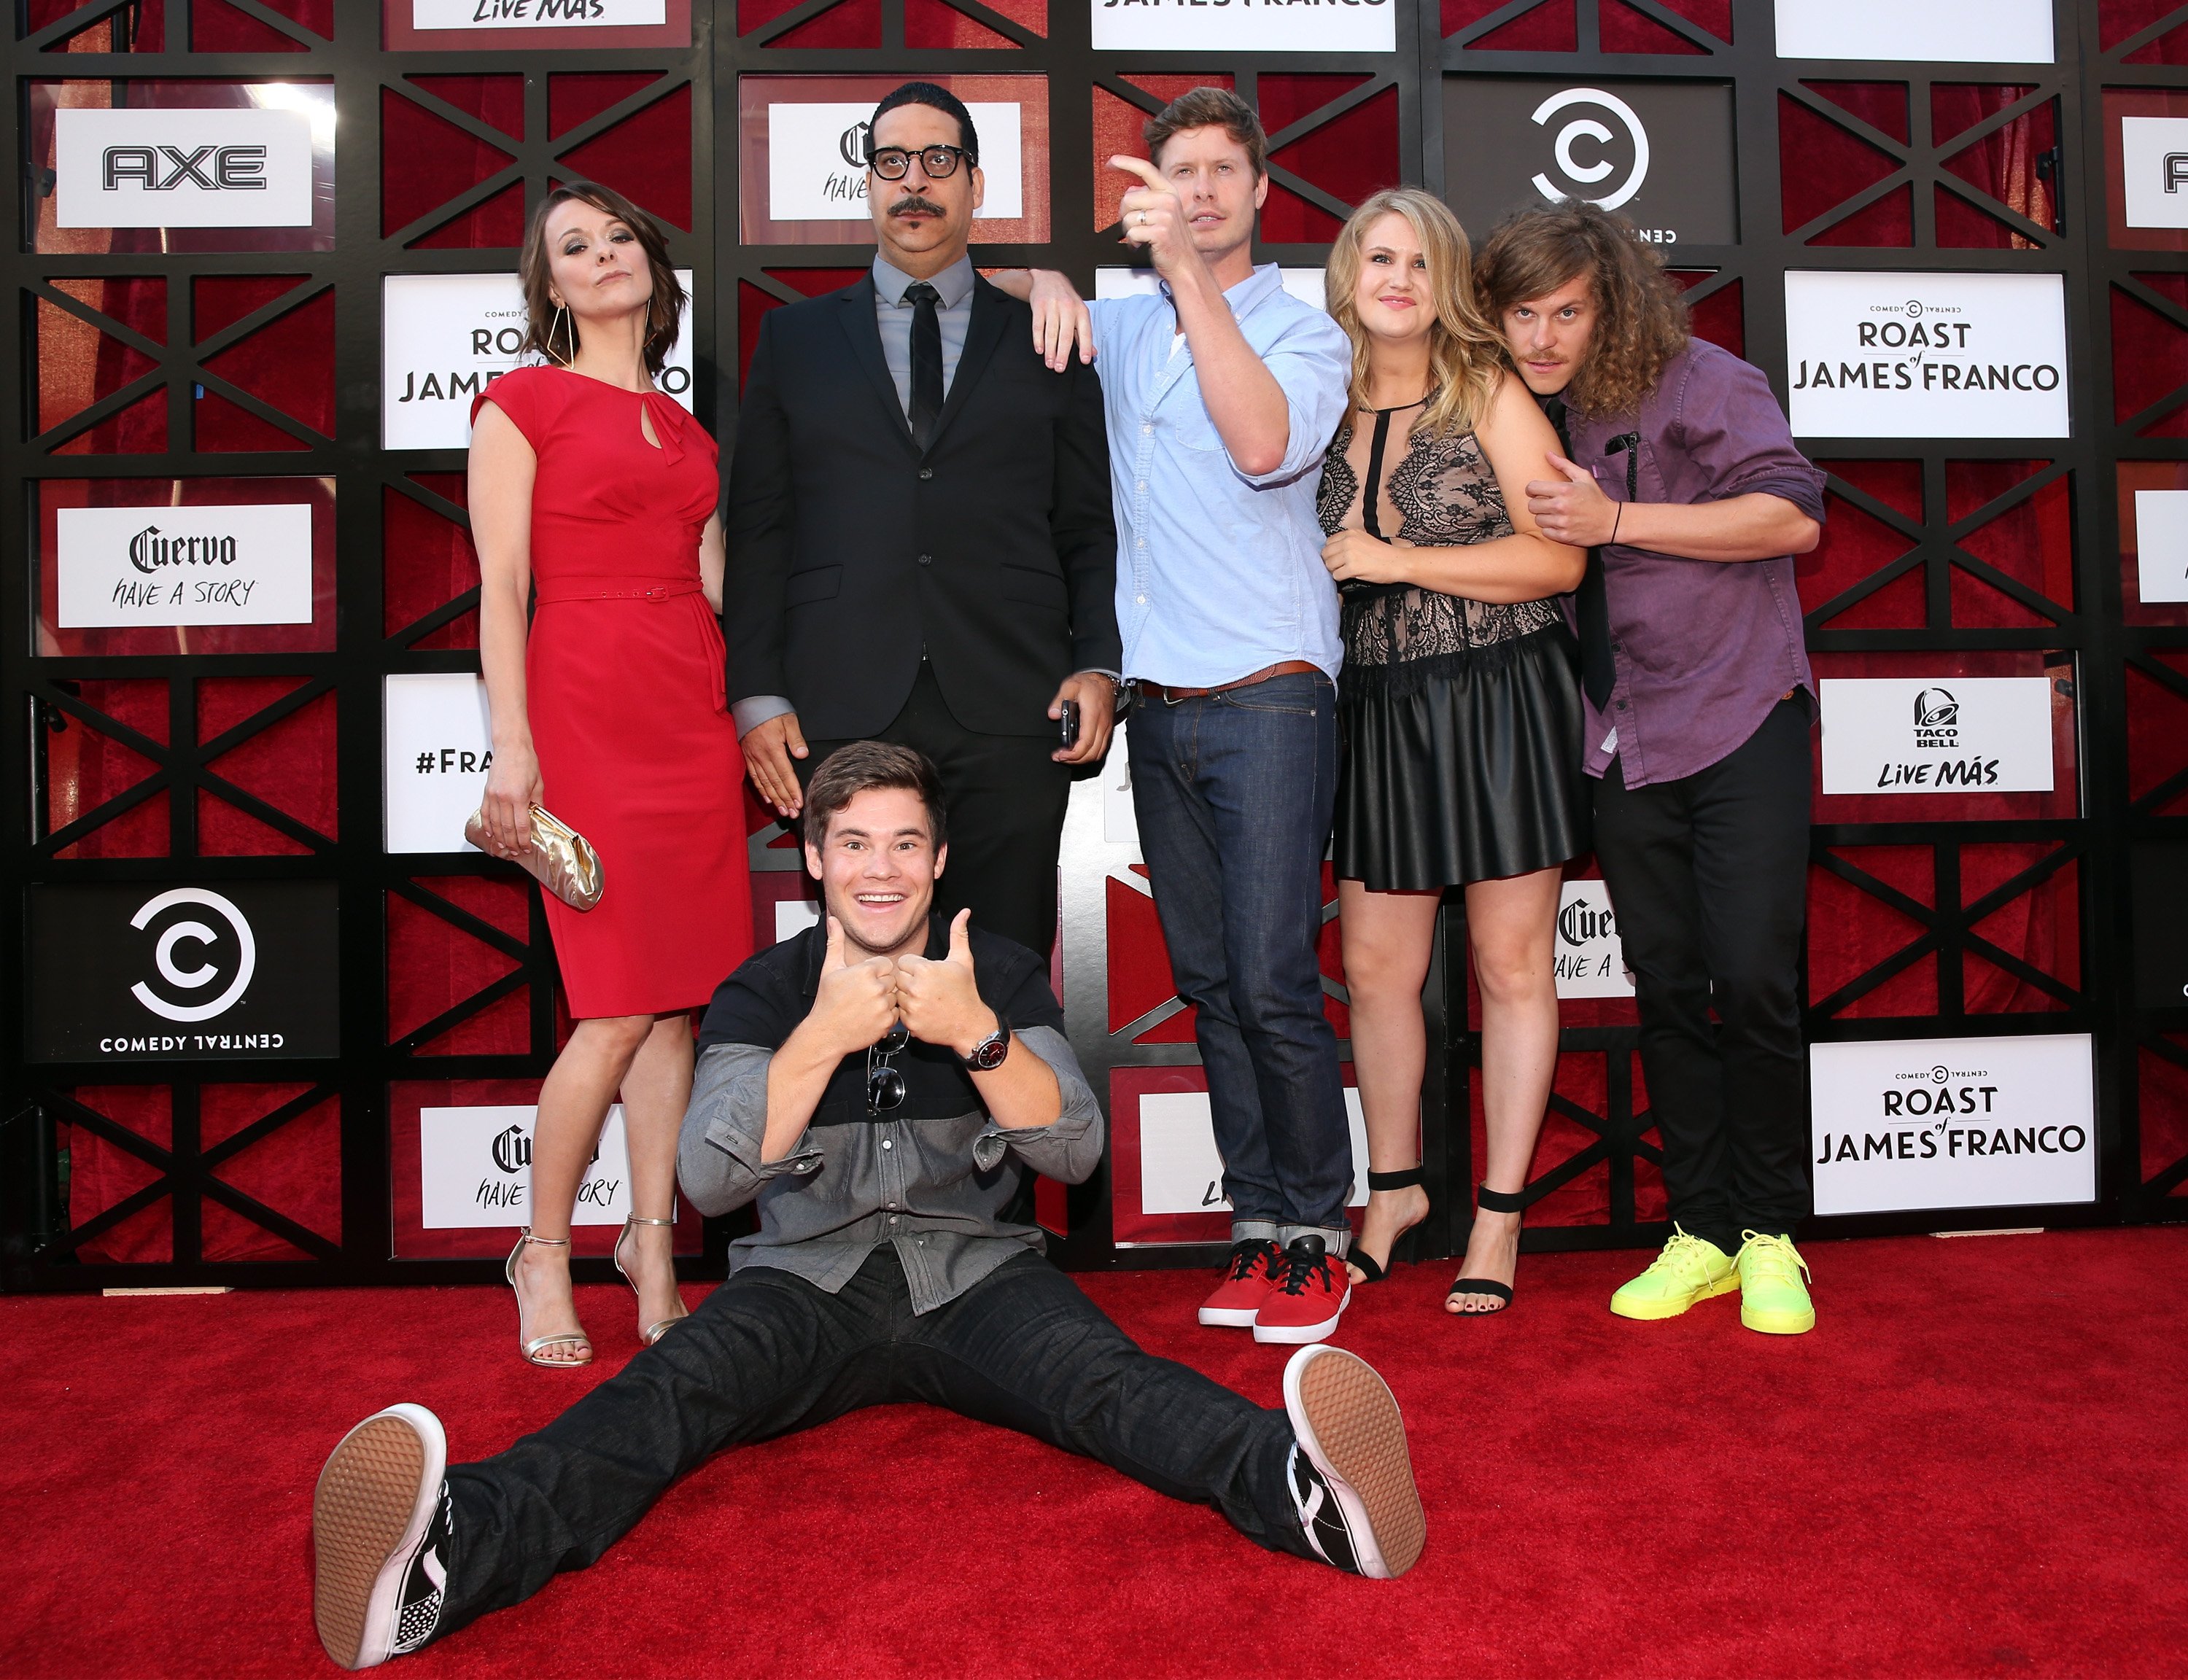 From left to right: Maribeth Monroe, Adam DeVine, Erik Griffin, Anders Holm, Jillian Bell, and Blake Anderson at "The Comedy Central Roast of James Franco" held at Culver Studios in Culver City, California, on August 25, 2013. | Source: Getty Images